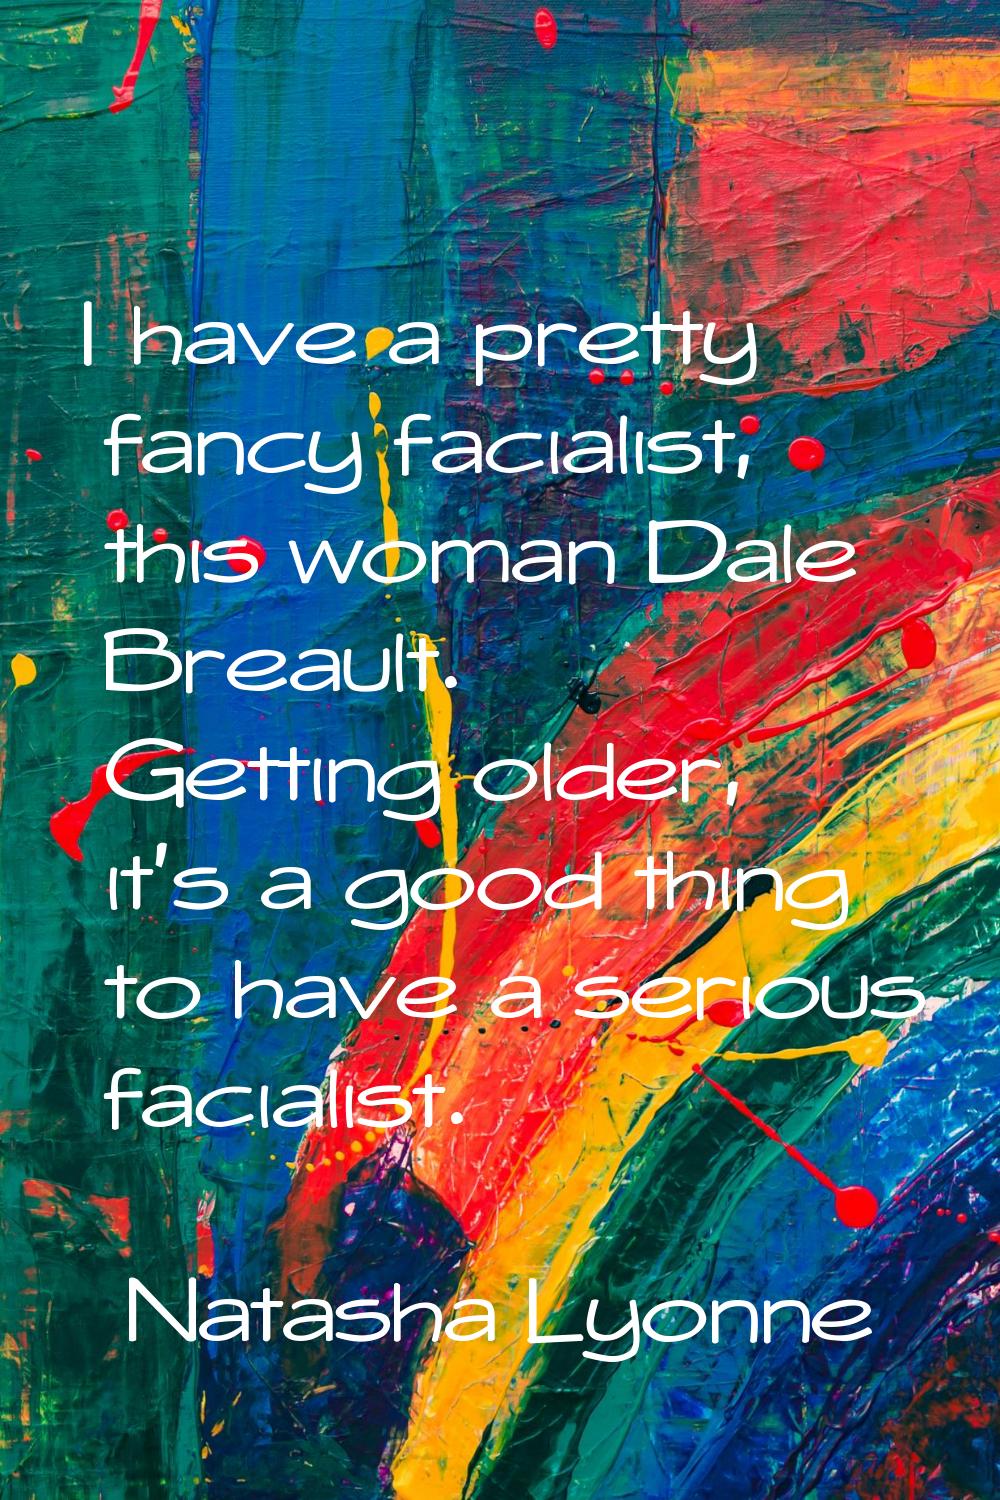 I have a pretty fancy facialist, this woman Dale Breault. Getting older, it's a good thing to have 